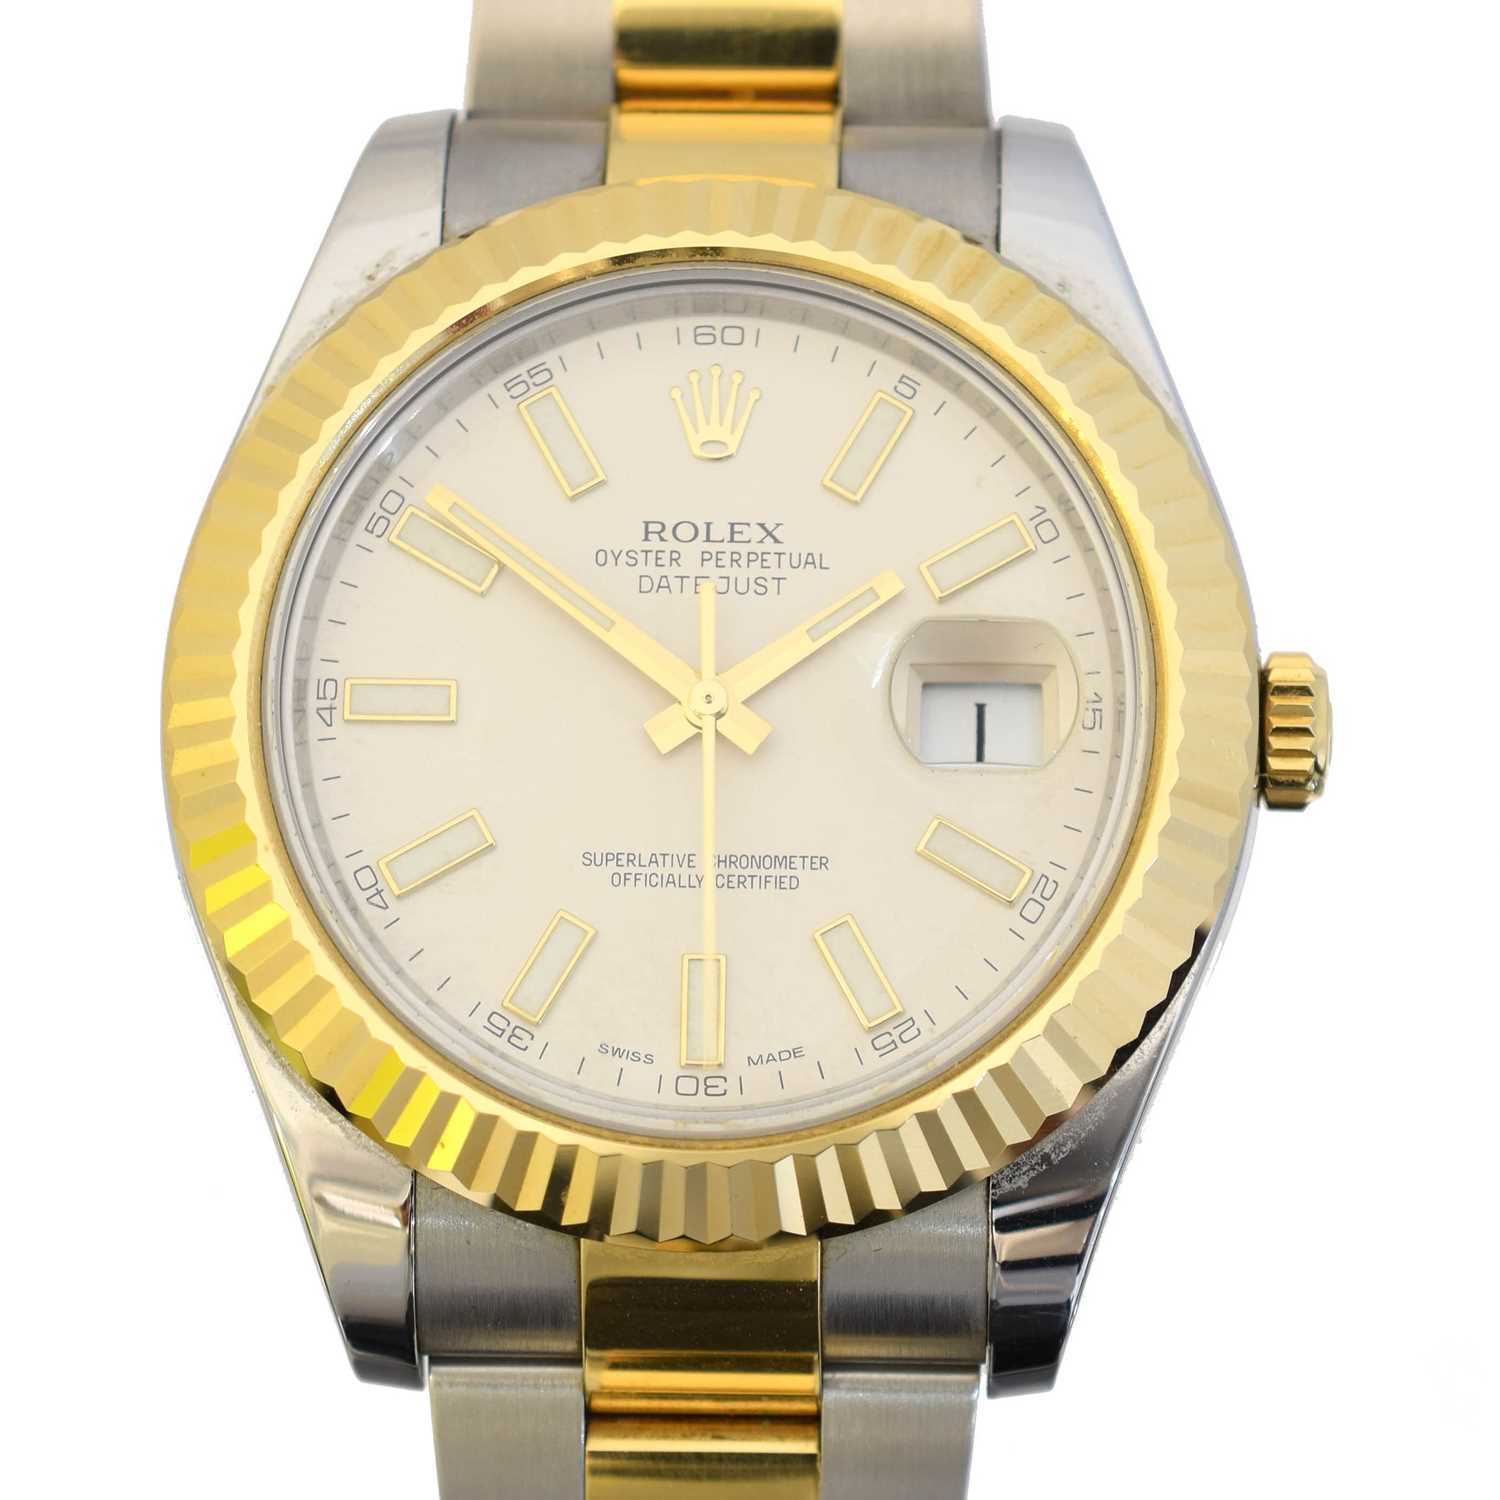 Lot A steel and gold Rolex Oyster Perpetual Datejust II wristwatch